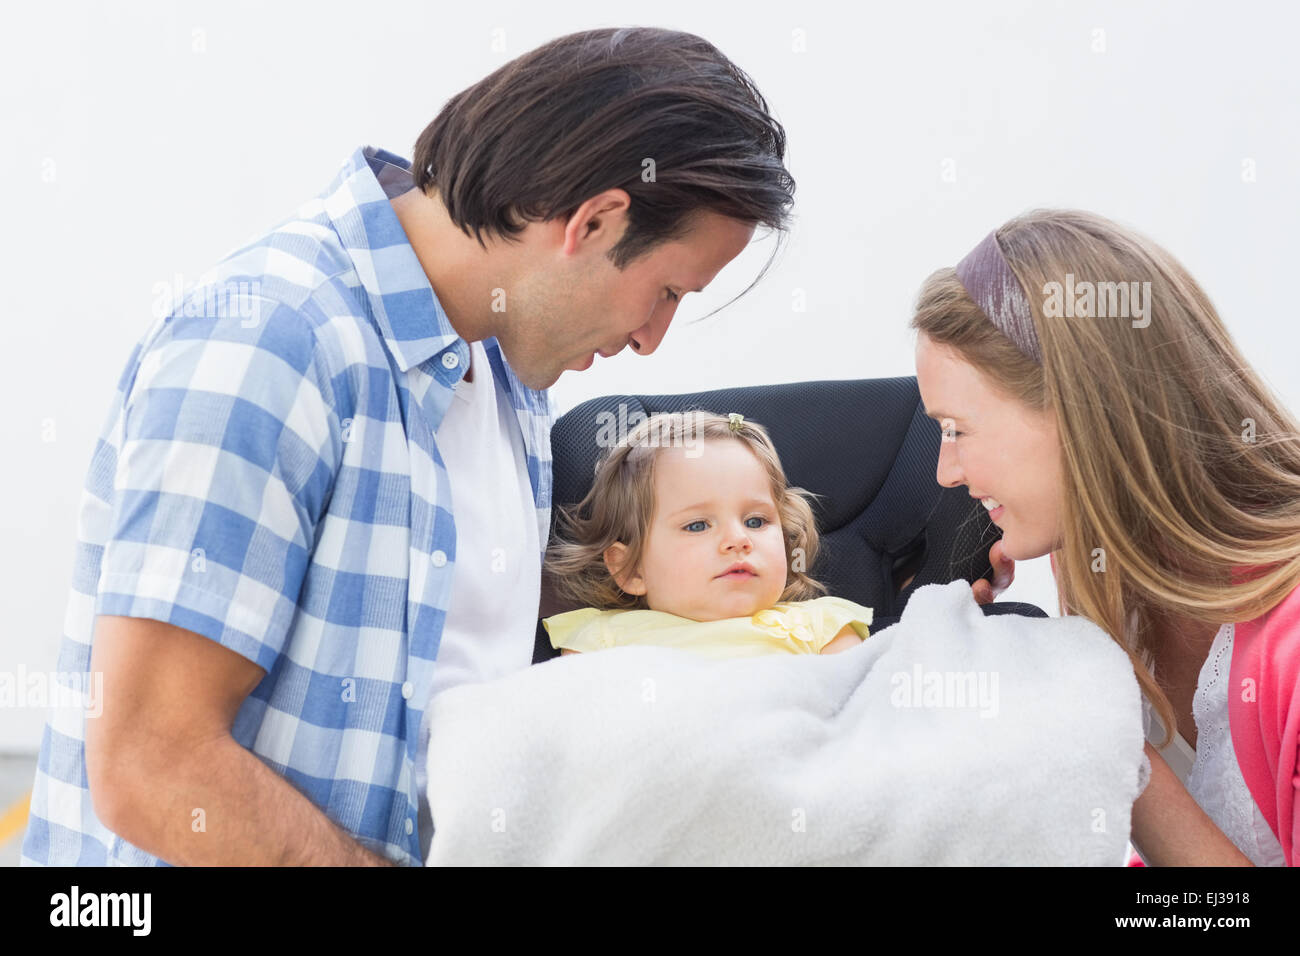 Parents carrying baby in his car seat Stock Photo